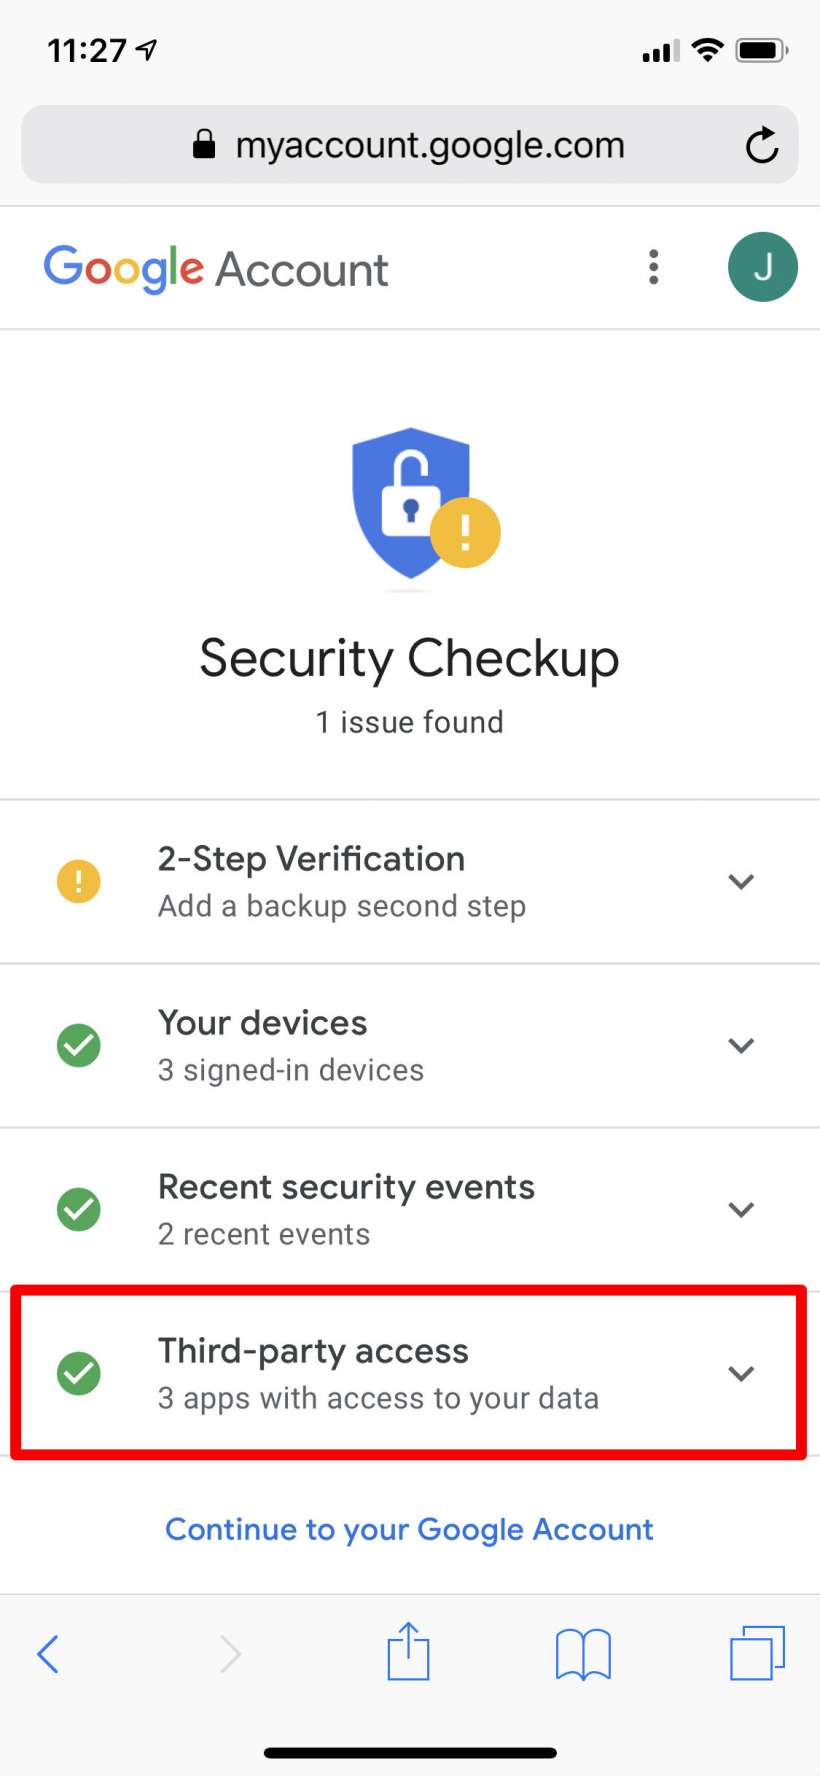 How to check and revoke third party access to your Google account.